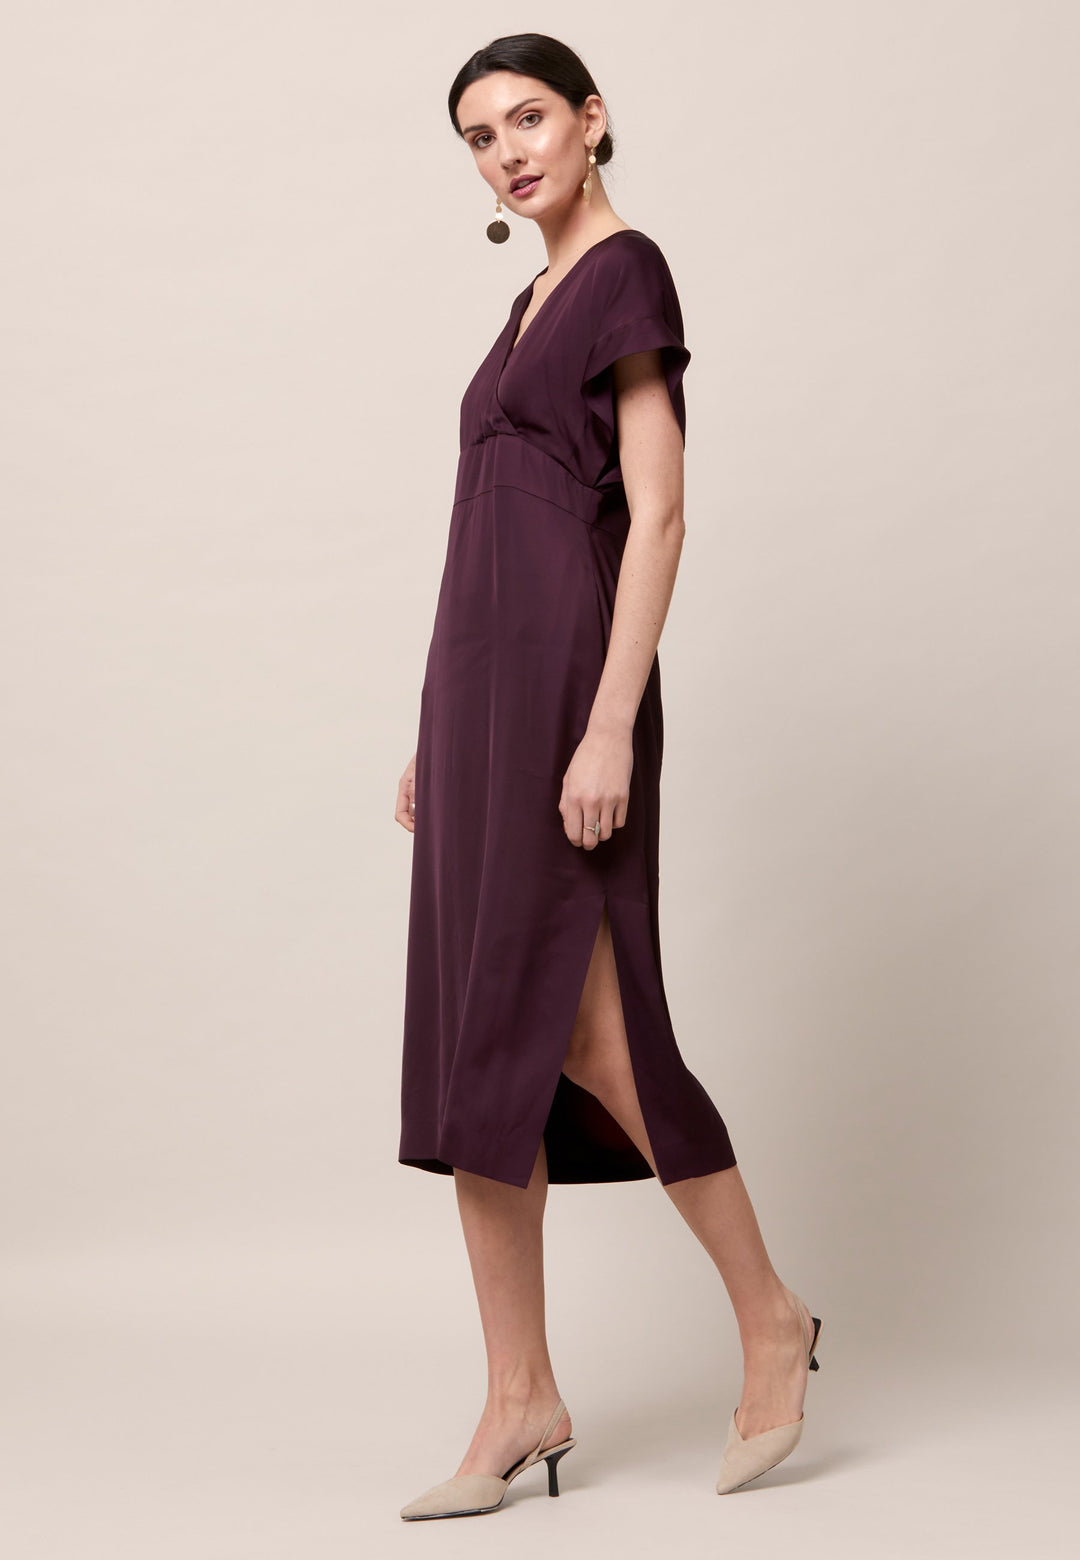 Evening edits get upgraded with the Fleur dress. Crafted in a luxurious Aubergine satin viscose. An easy-fitting silhouette with a v-neckline. Skirt falls to the mid-calf and side seam slit adds a sense of allure. Features handy Side seam pockets. Engineered with an elegant key-hole back neck detail. Simply add heels and a clutch for a look that turns heads at any event. Classic Occasionwear, modernized.